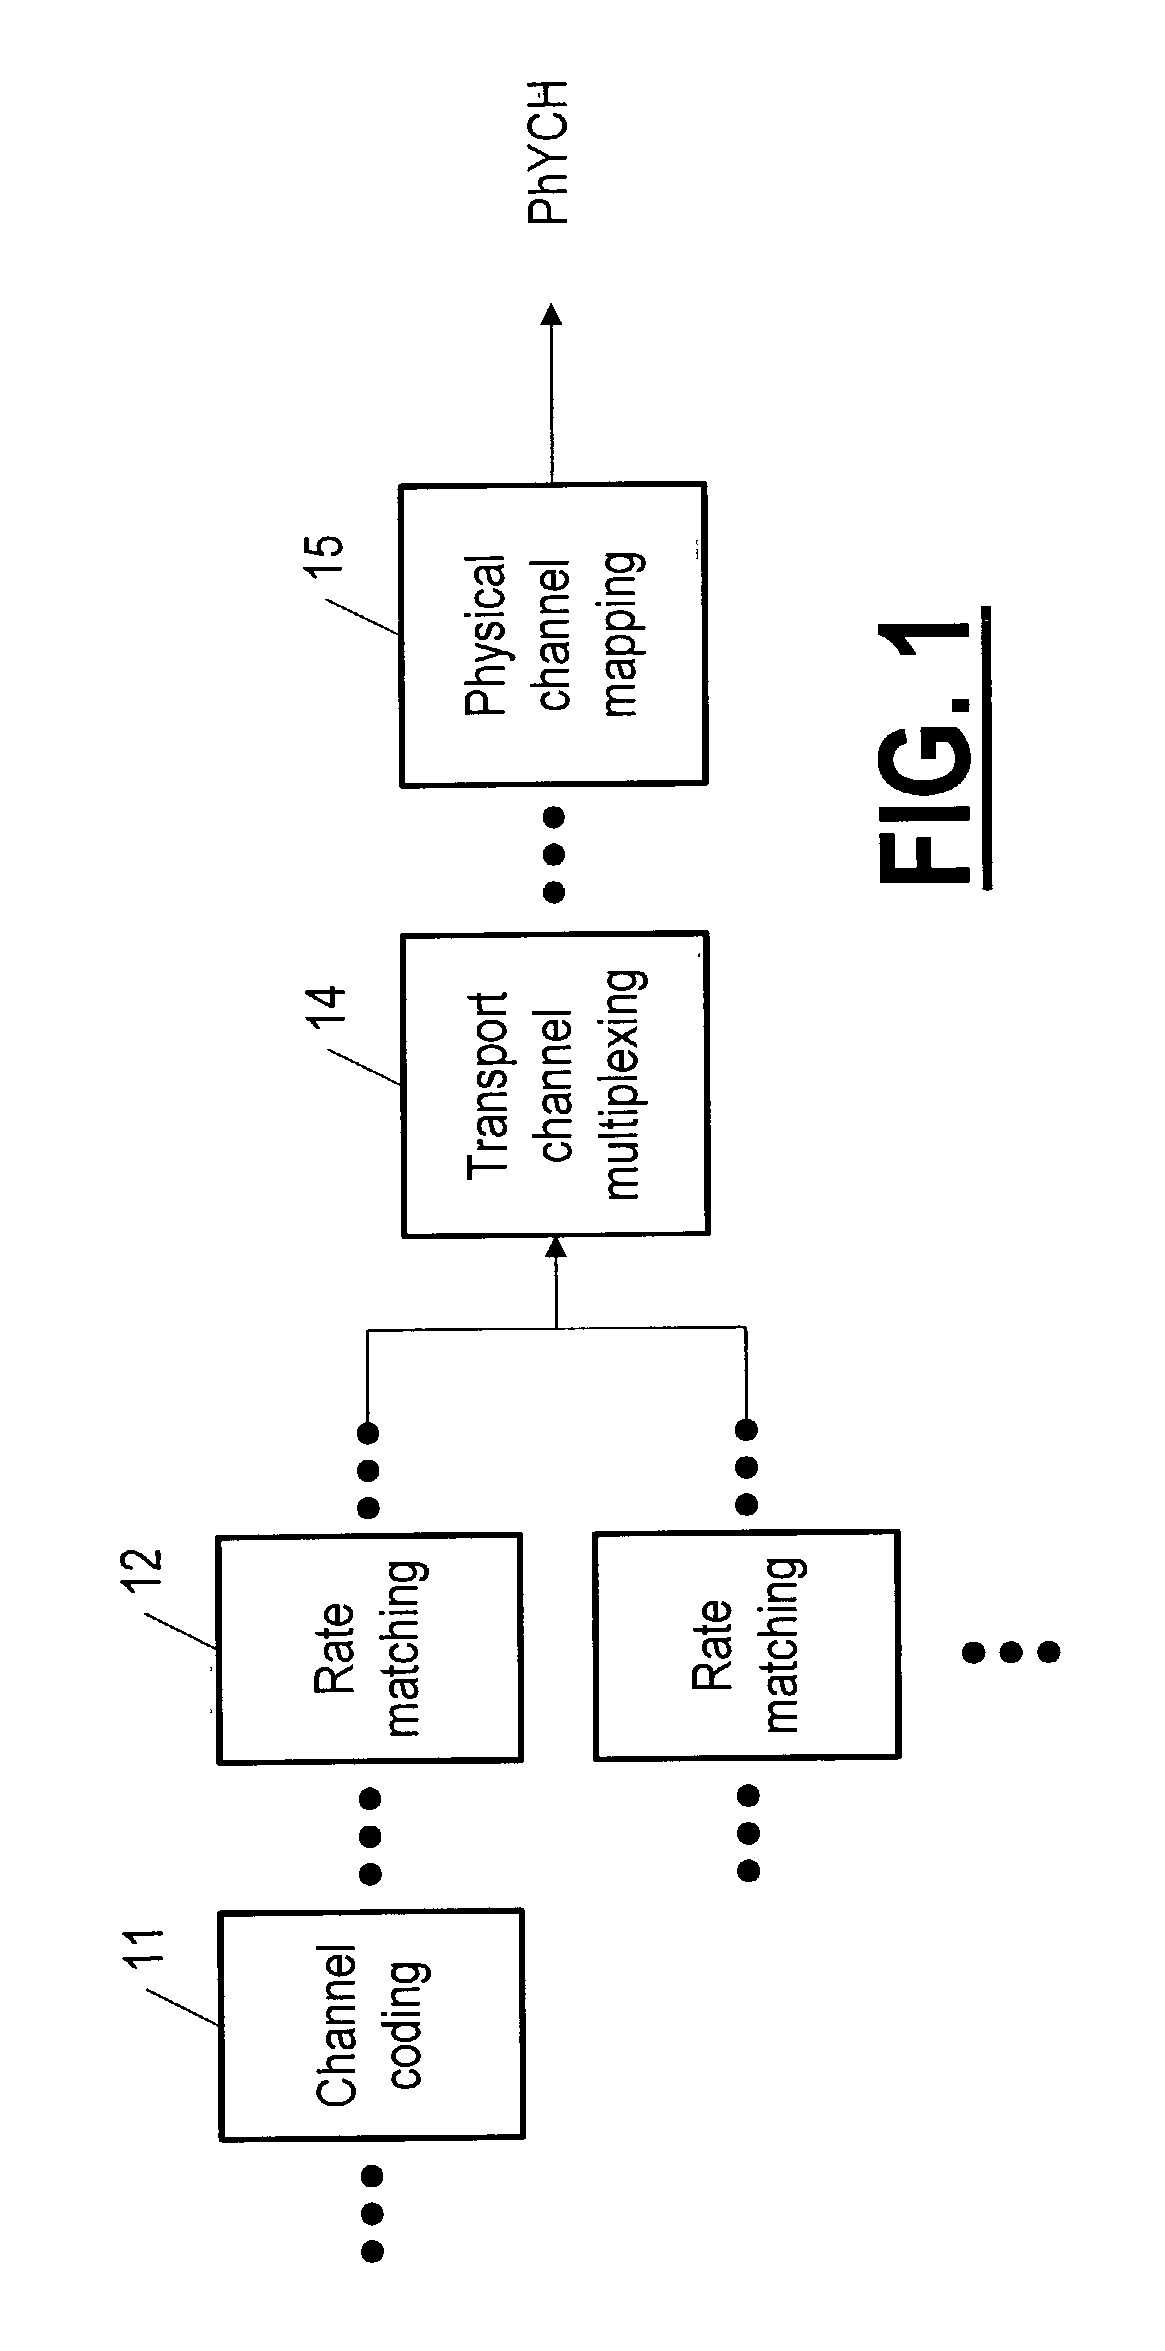 Method for rate matching to support incremental redundancy with flexible layer one